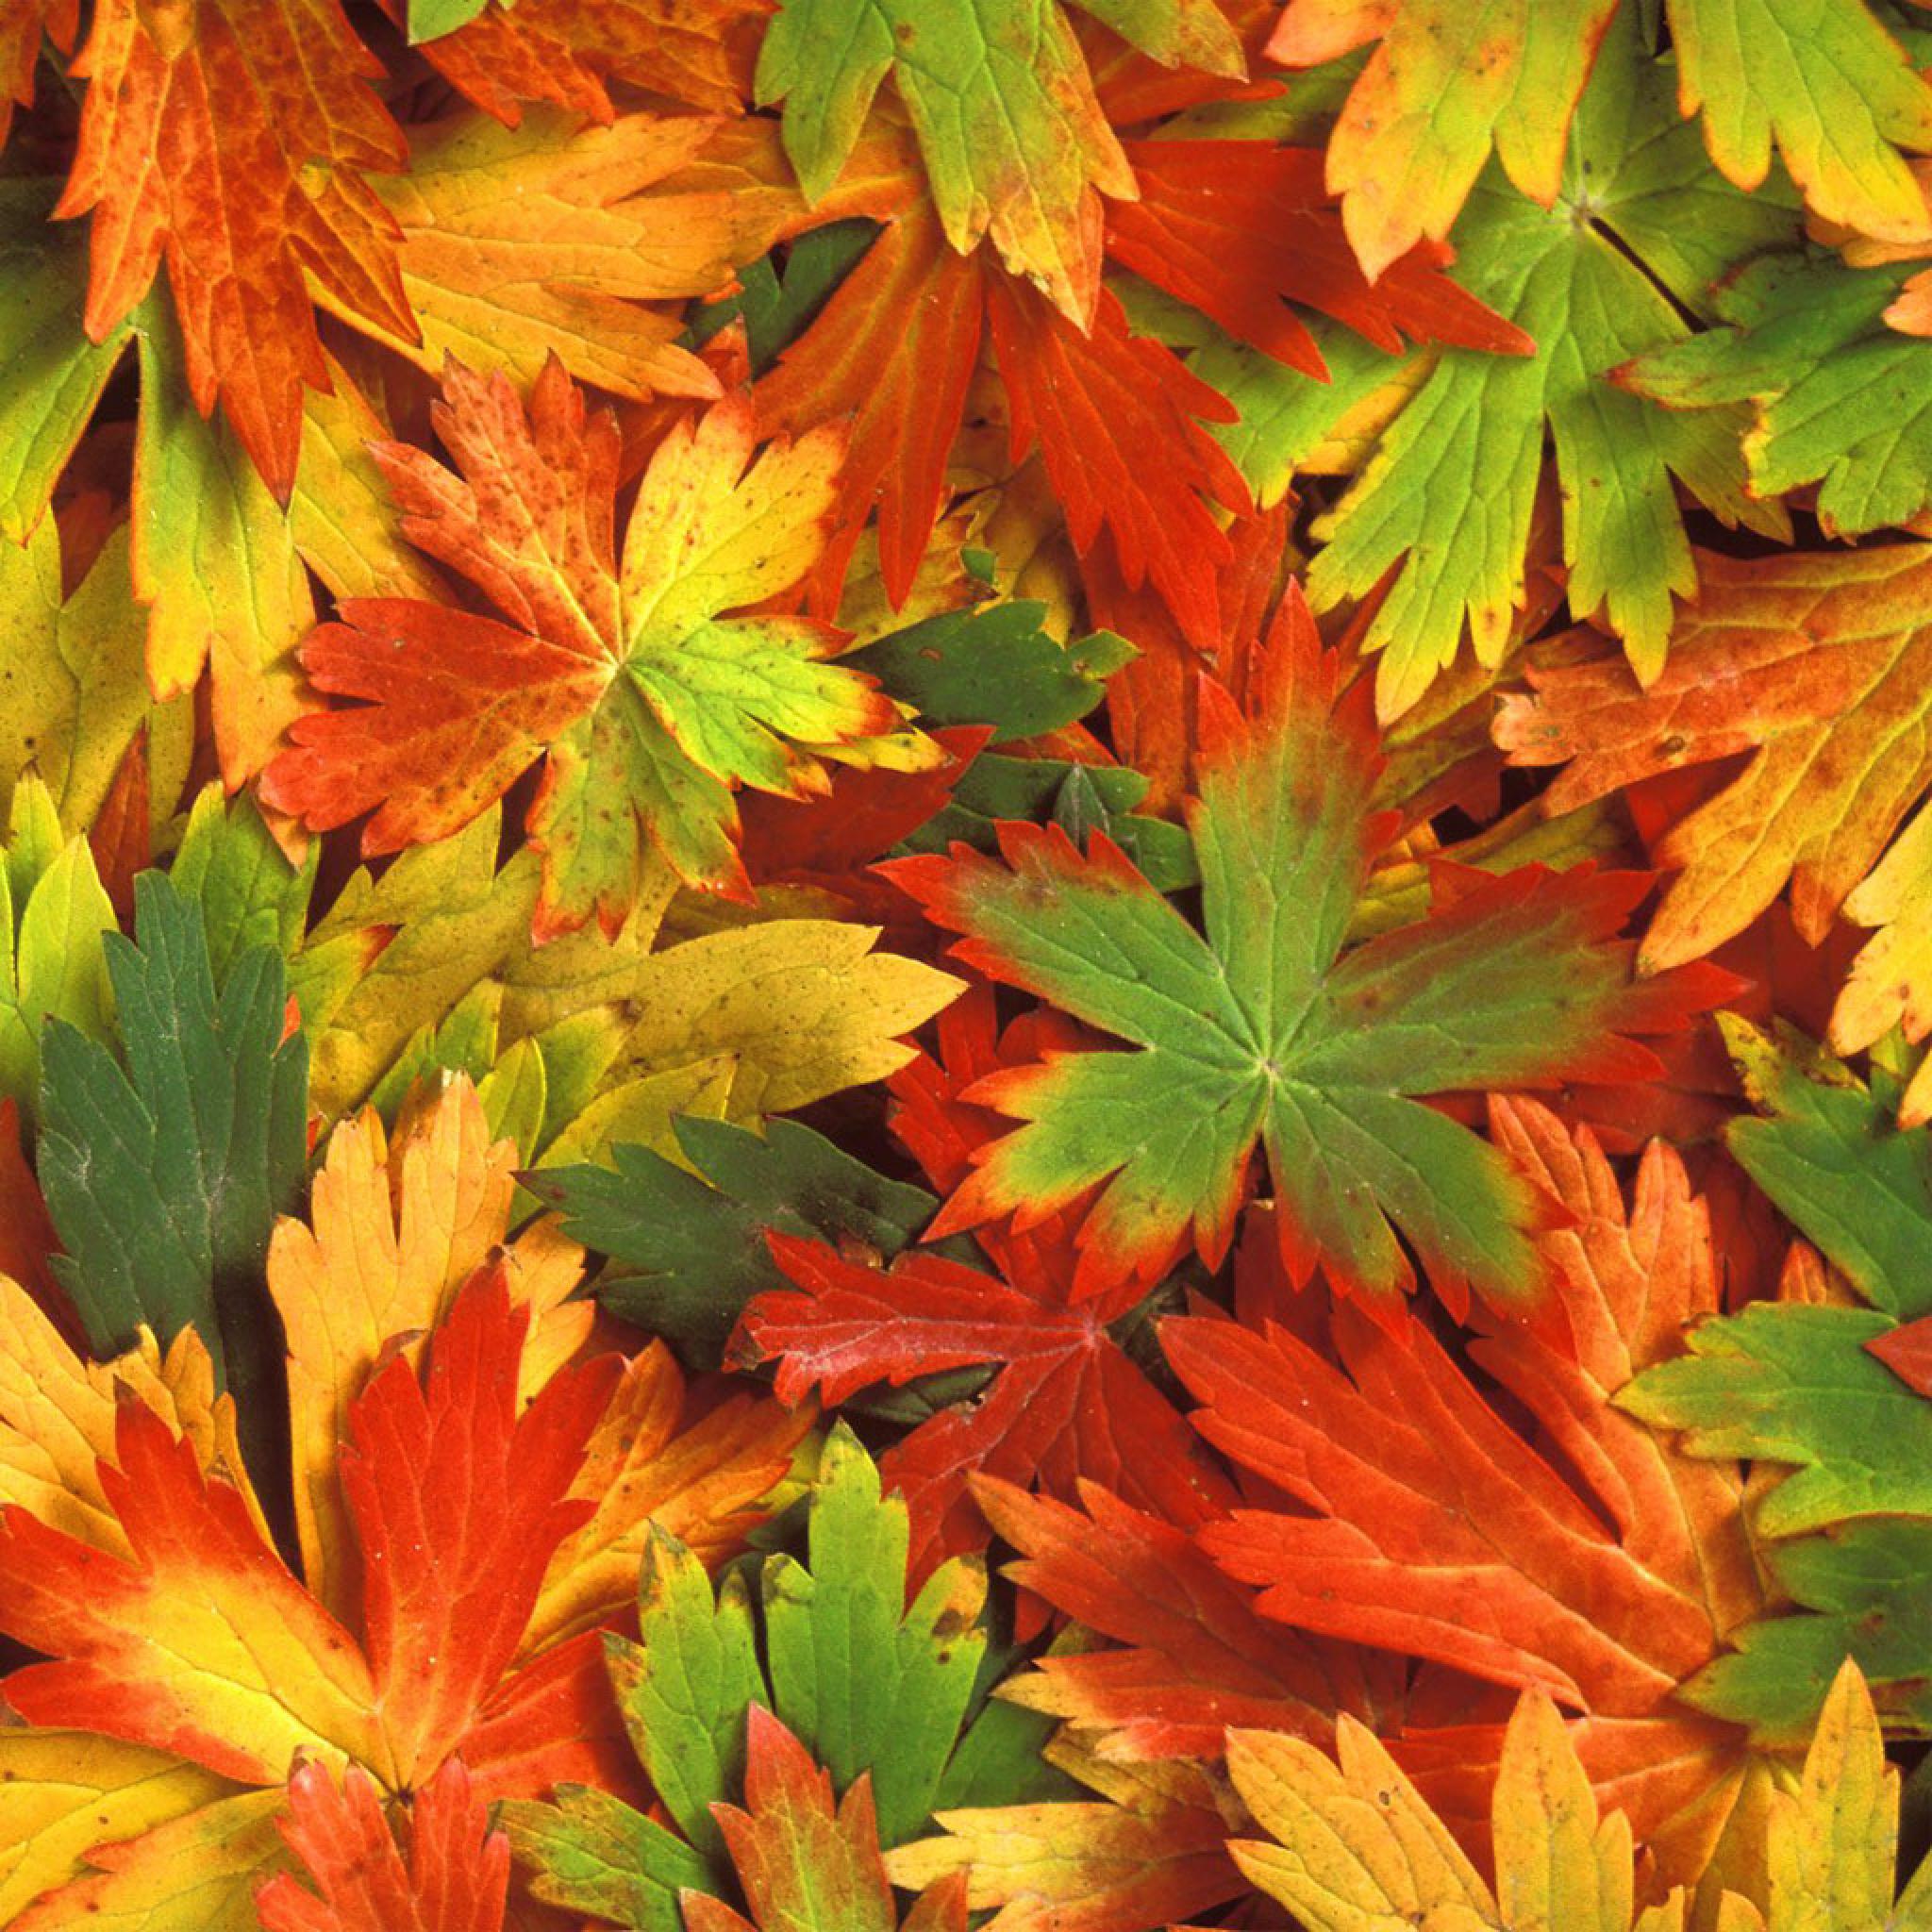 Nature Autumn Leaves Fall iPhone HD Wallpaper Free